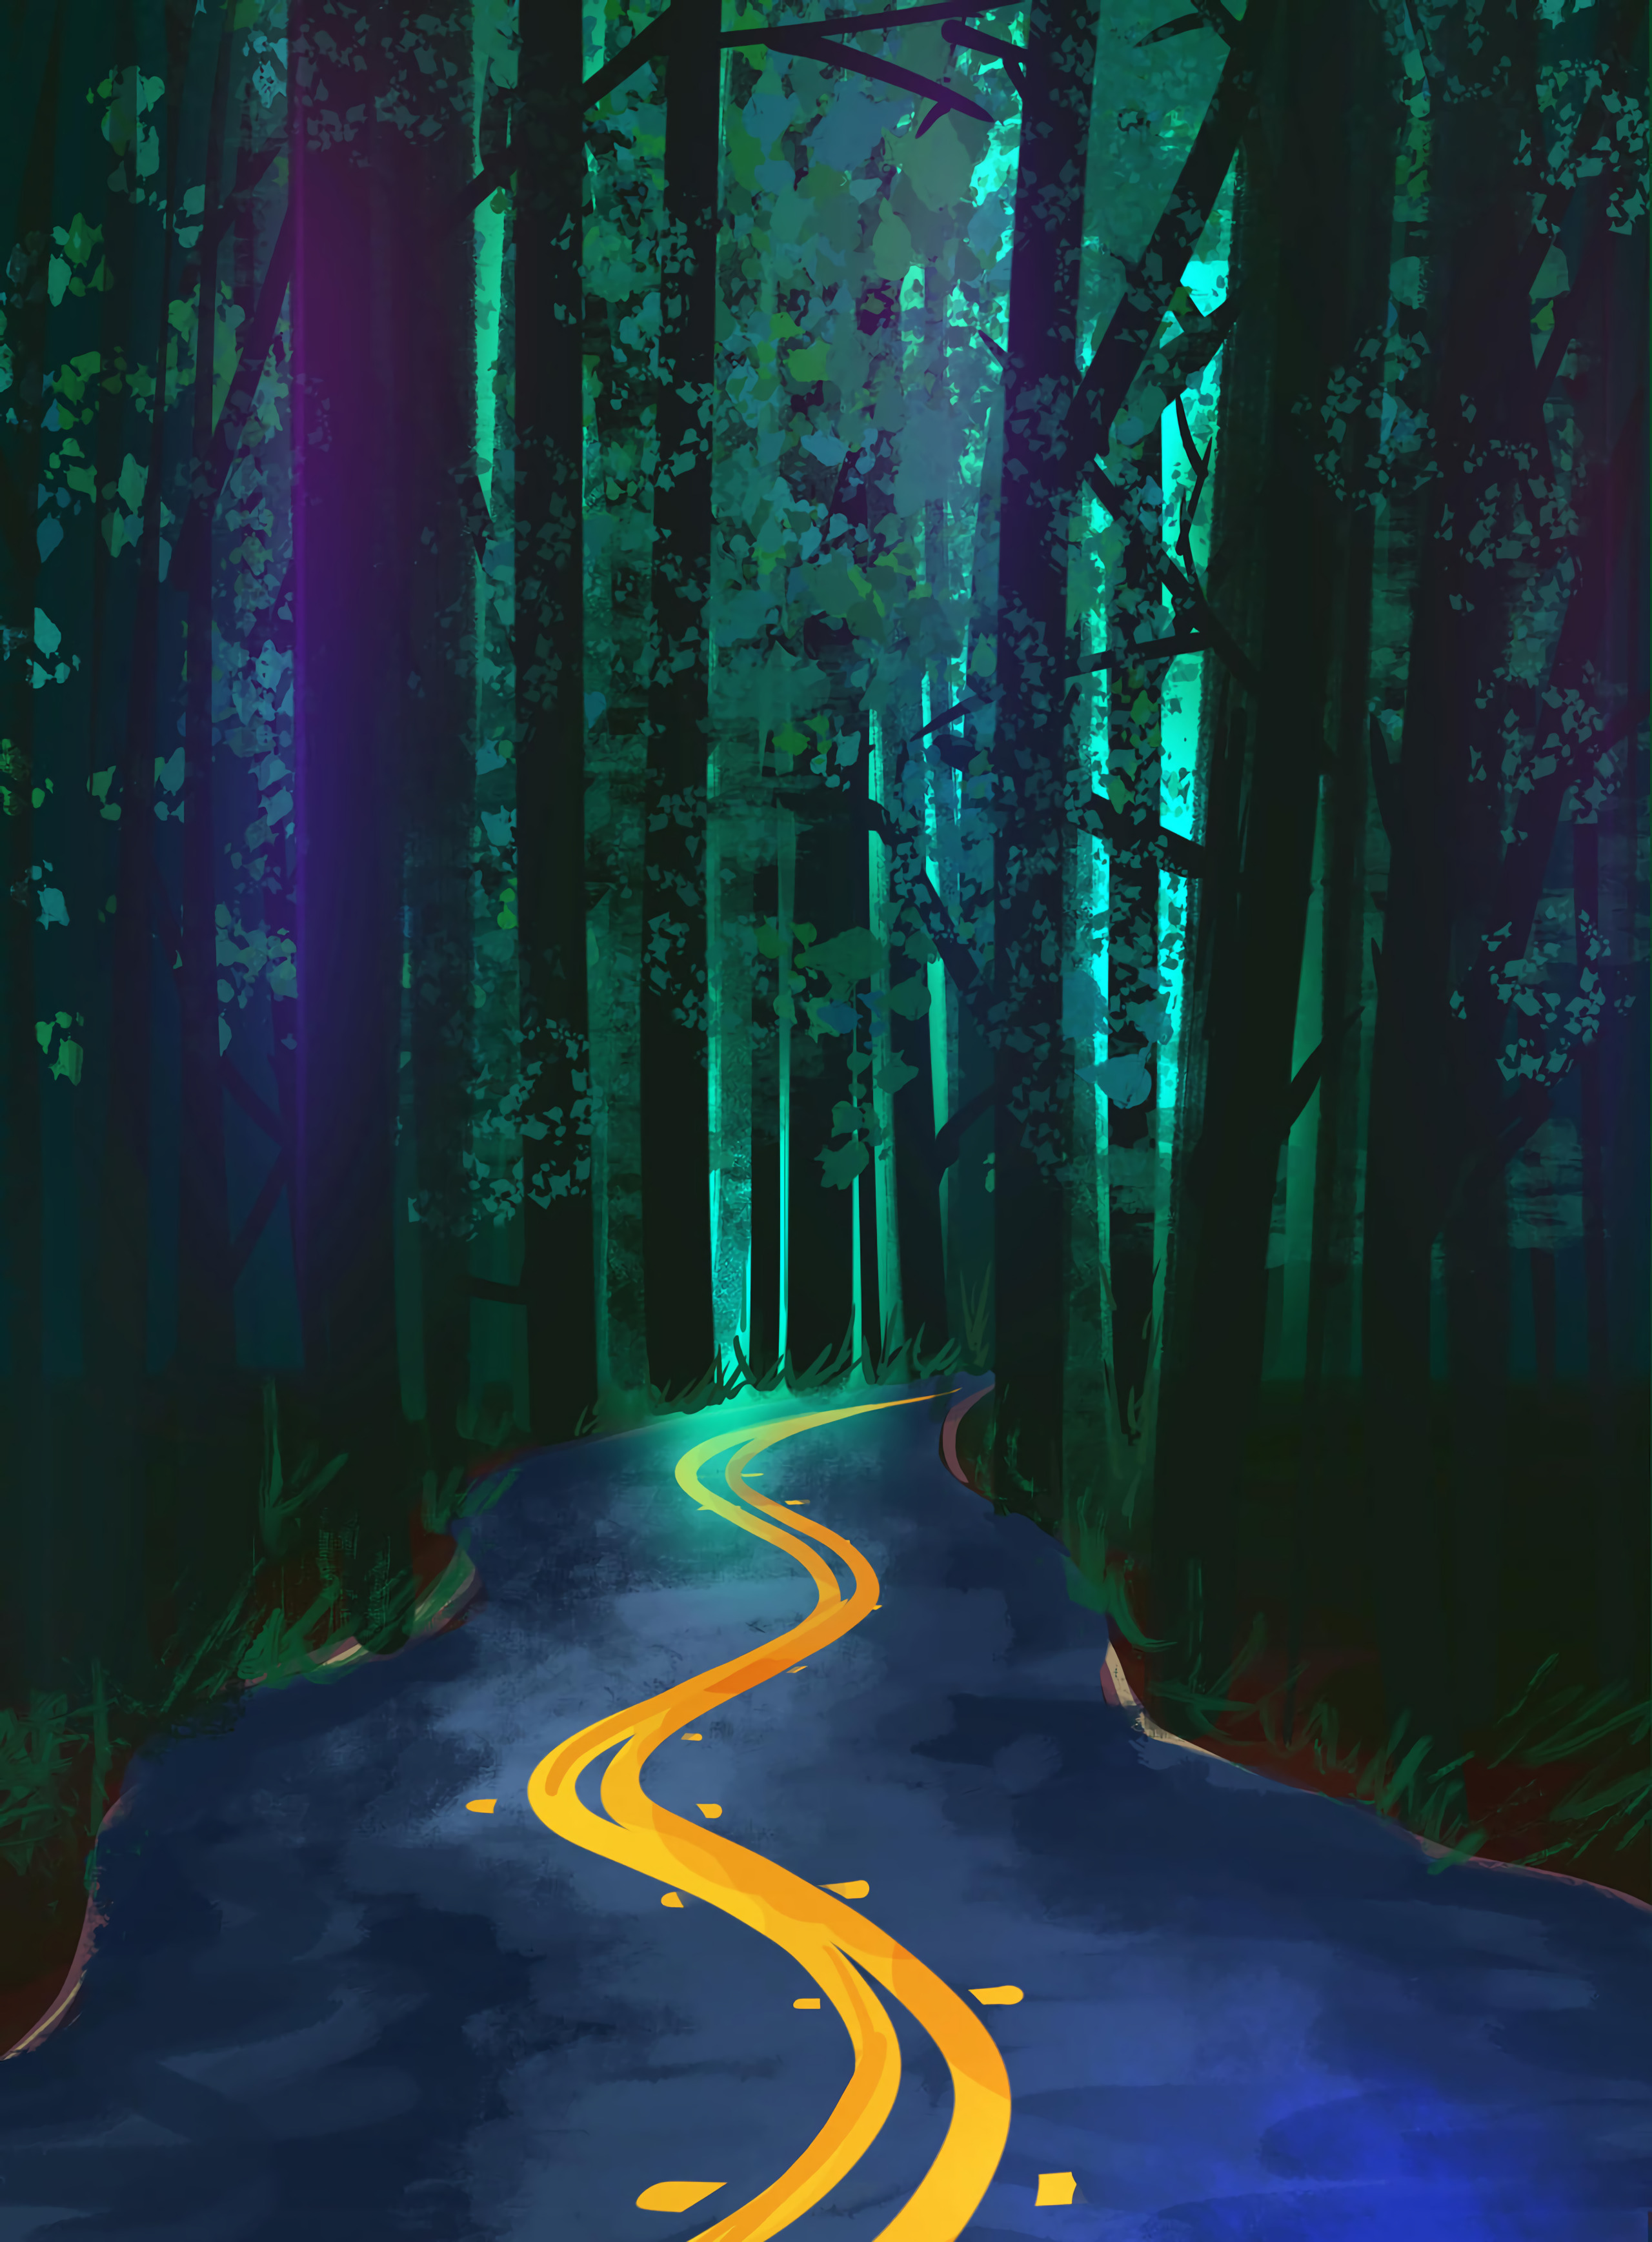 art, road, forest, winding, sinuous